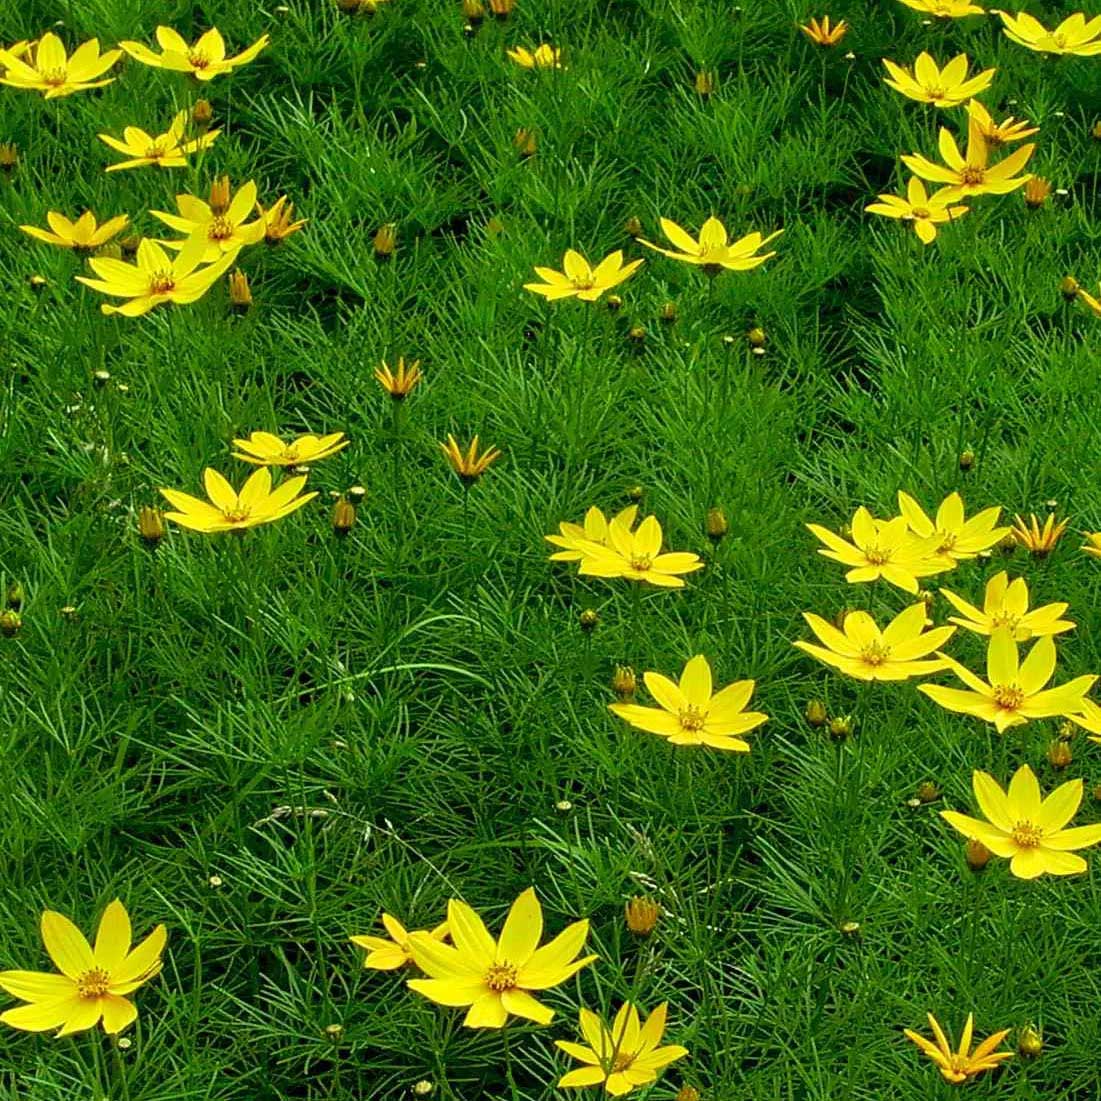 Thread Leaf Coreopsis is a native perennial in the daisy family that grows in dense bushy clumps. It may grow 2-3 feet tall with a similar spread.